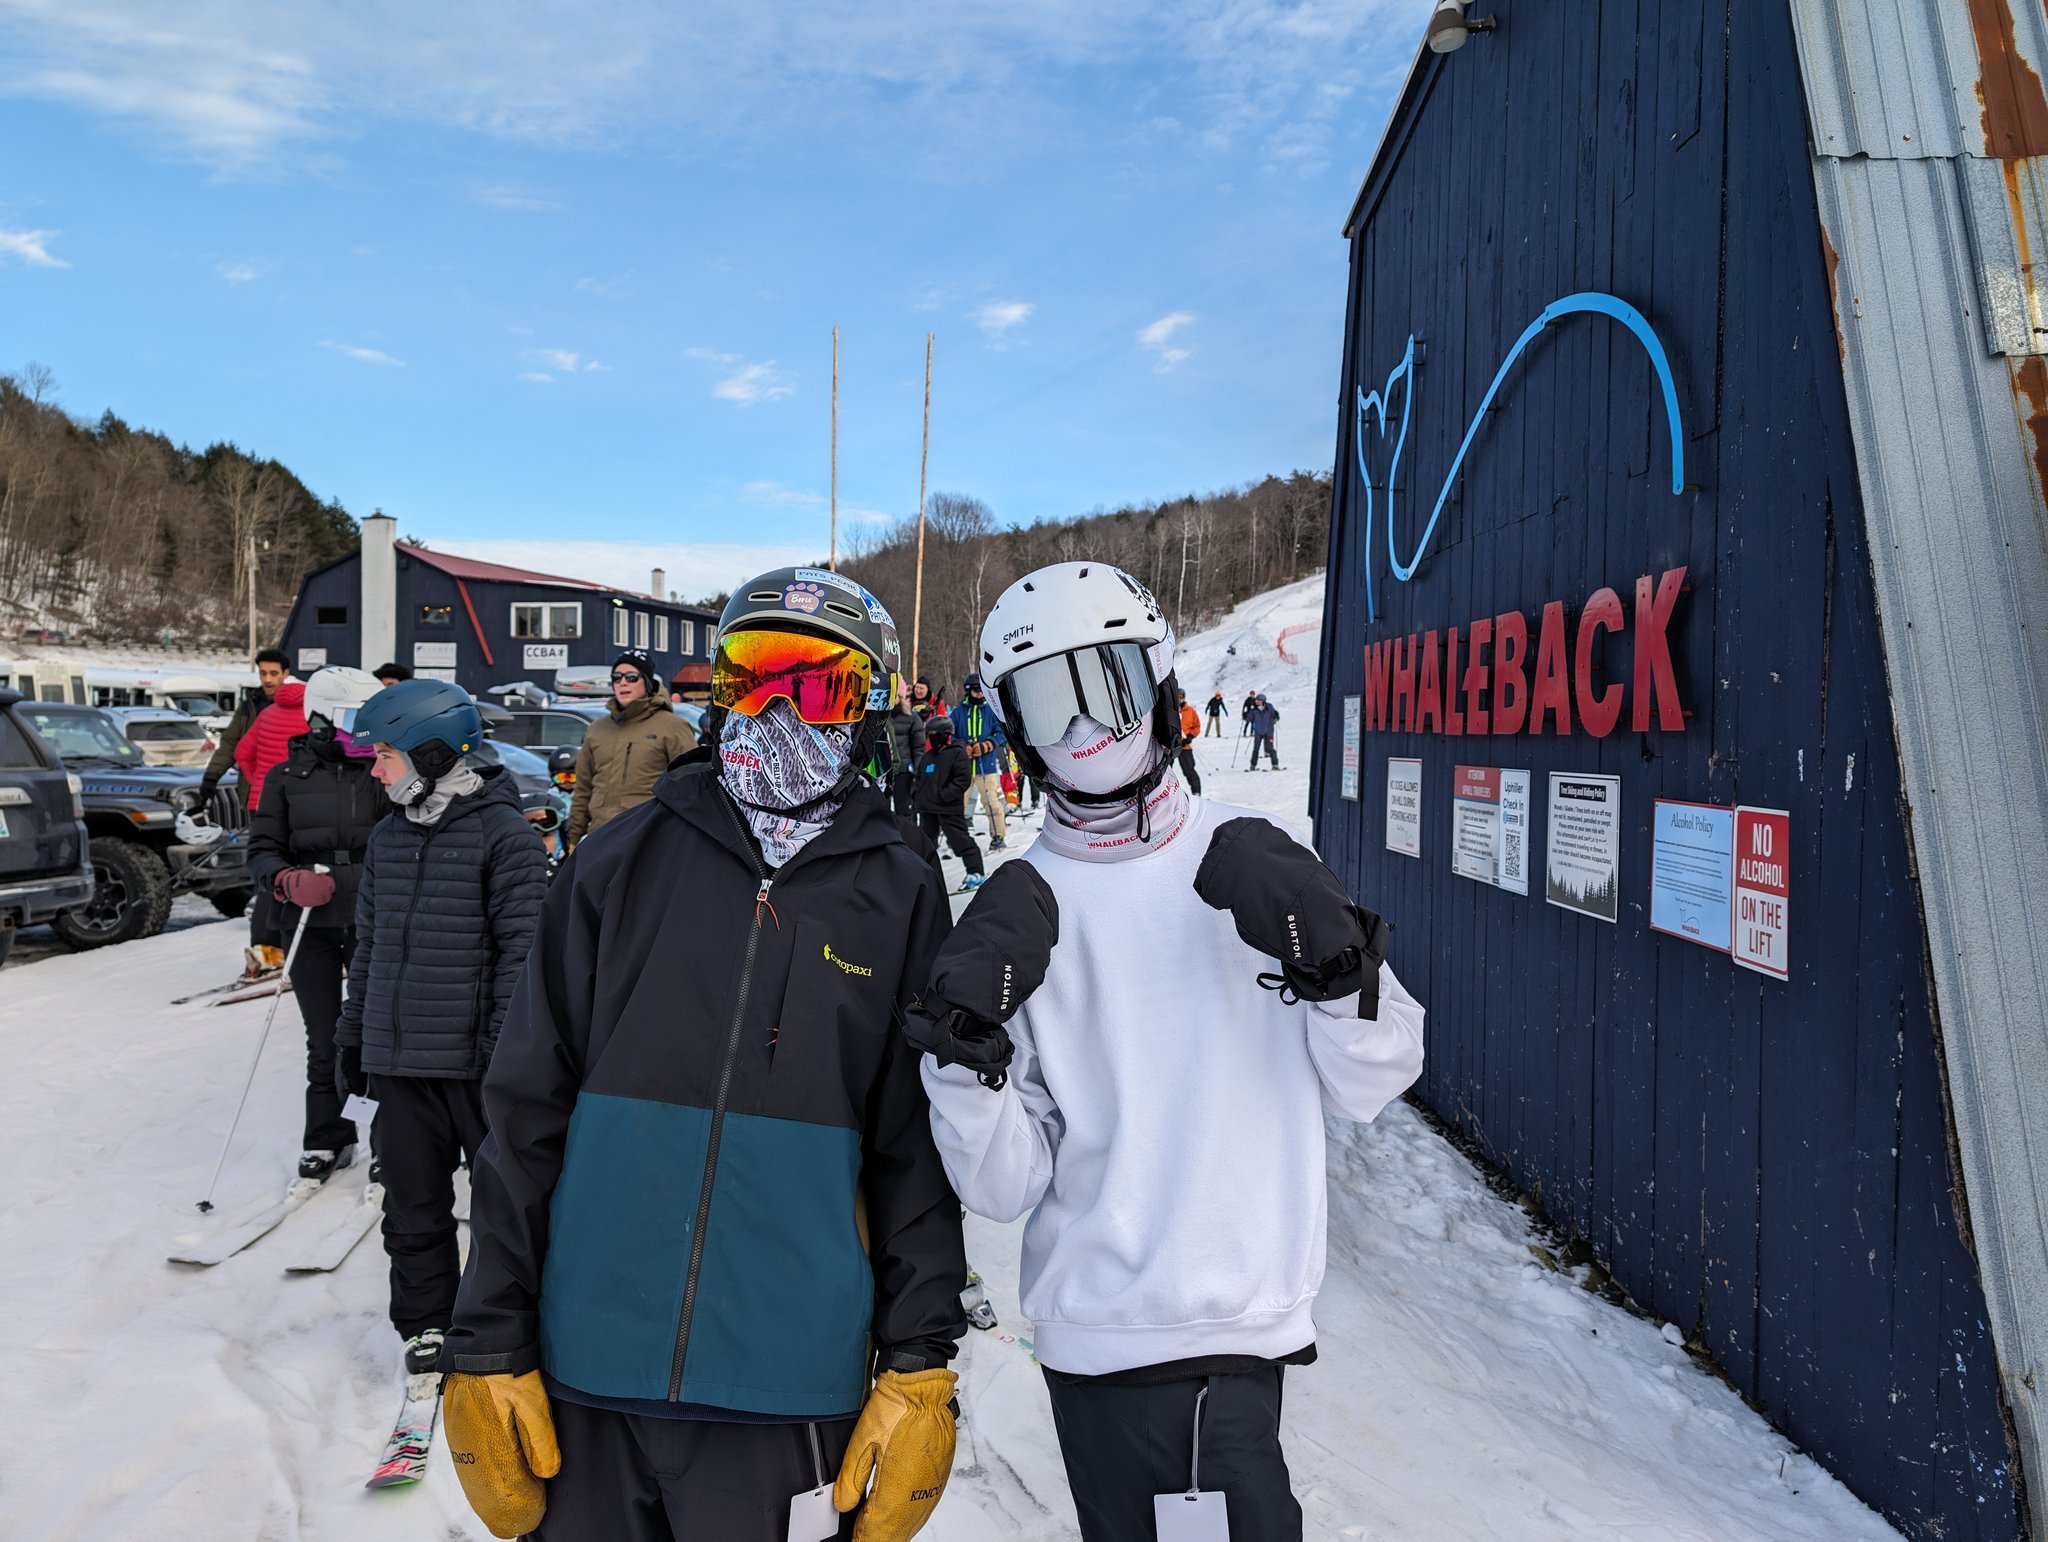 Hurry!  Our Early Early Bird Season Pass Sale Ends in less than 72 hours!  Have you seen all these amazing passholder benefits?
@indyskipass: Whaleback season pass holders get access to add-on pricing for the Indy Pass, which allows skiing at so many